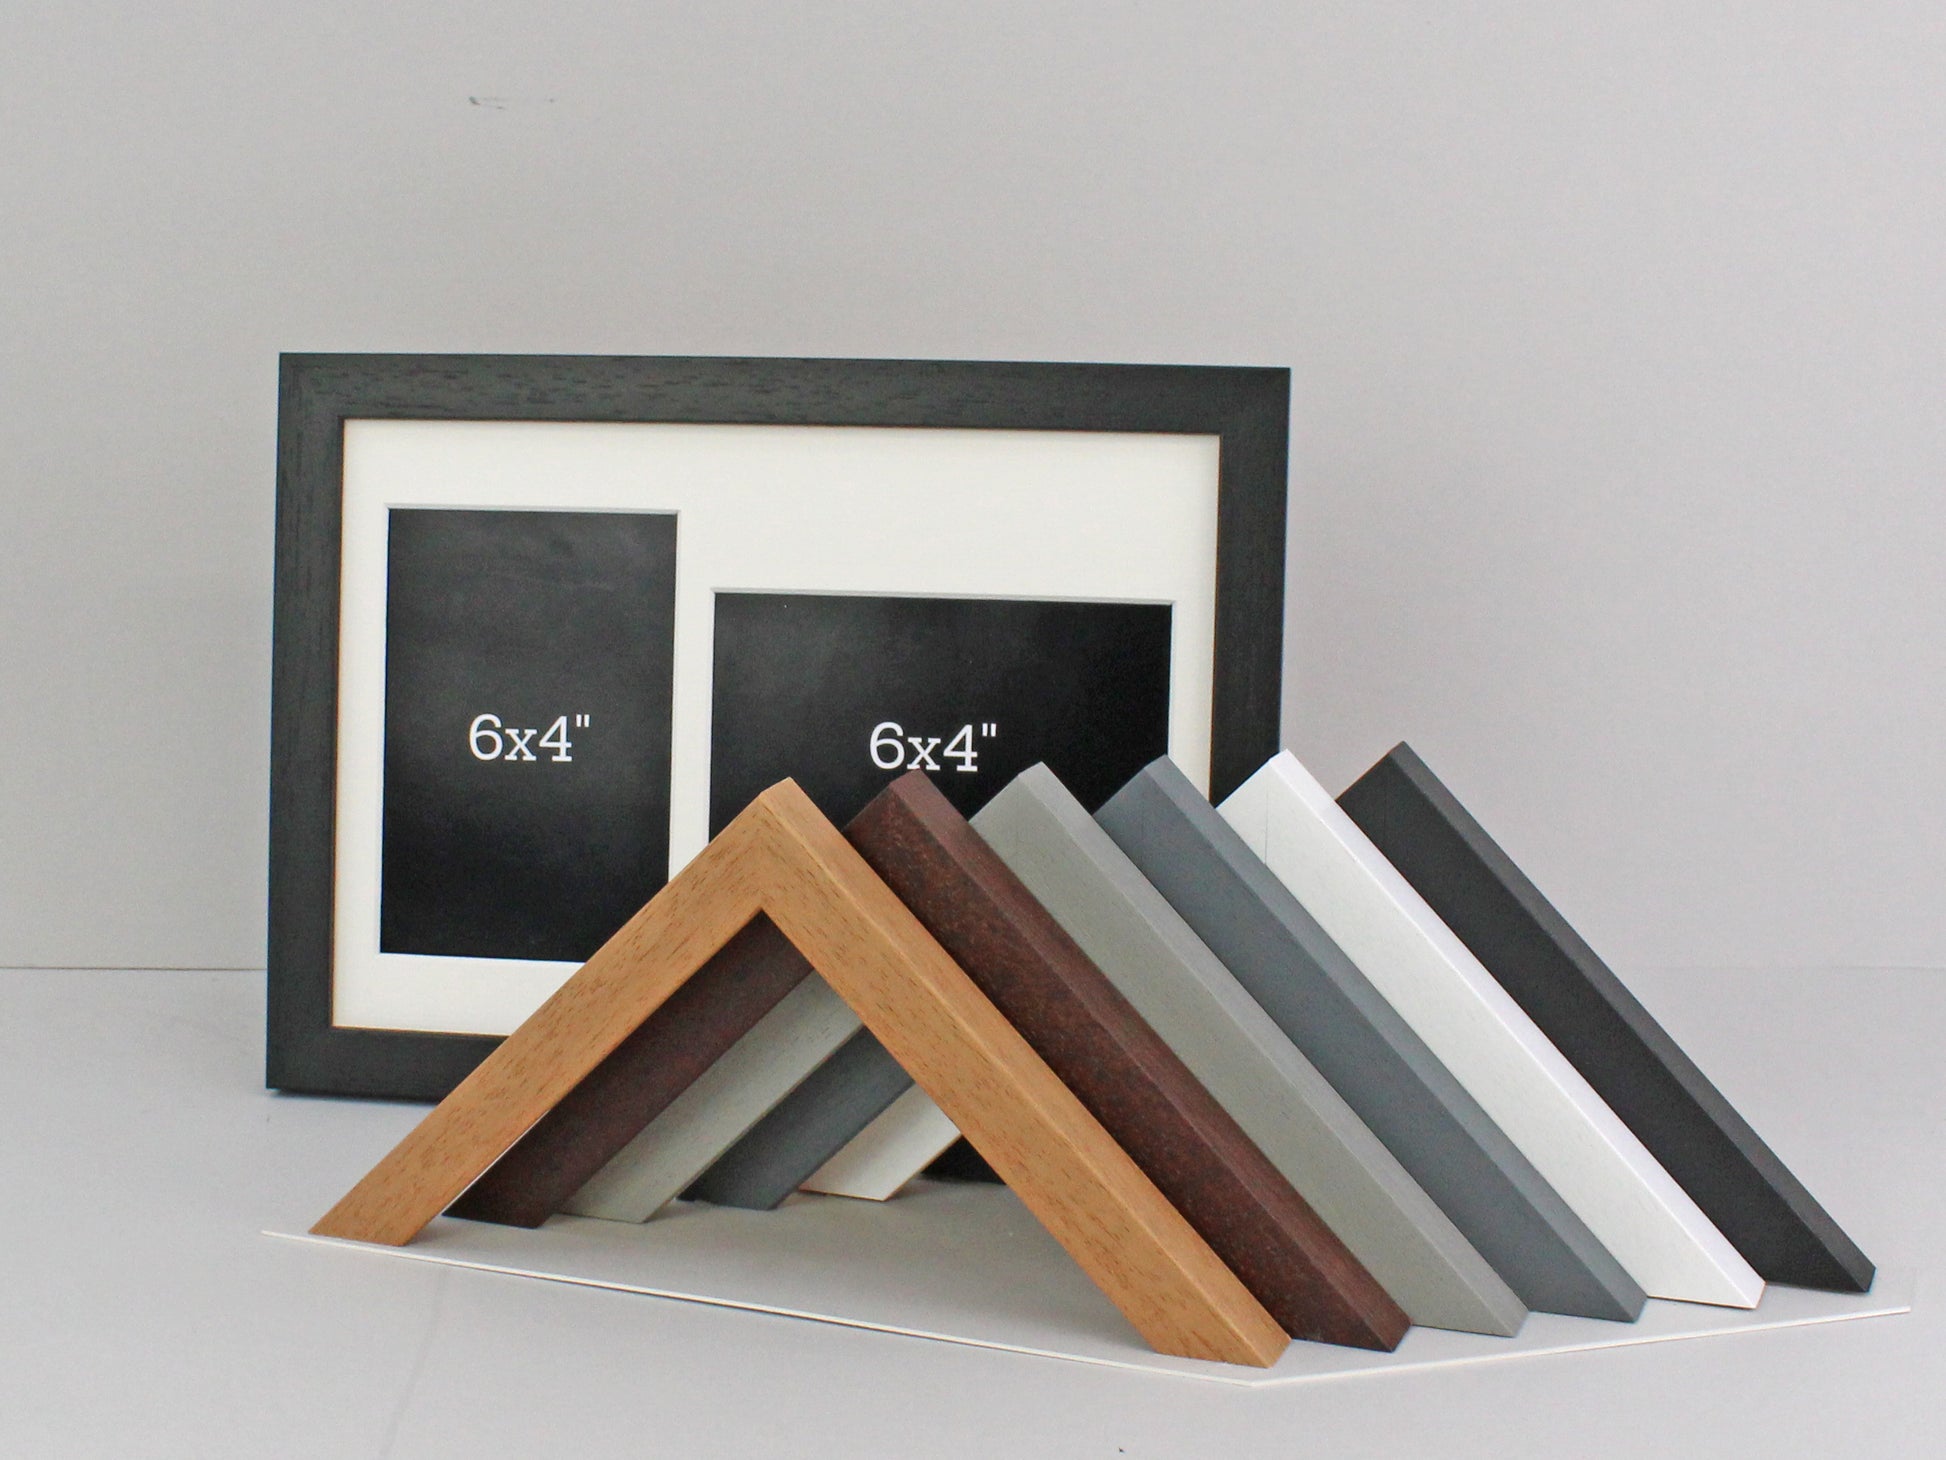 Suits Two 6x4" Photos; One Portrait and One Landscape. A4. Wooden Multi Aperture Photo Frame. - PhotoFramesandMore - Wooden Picture Frames